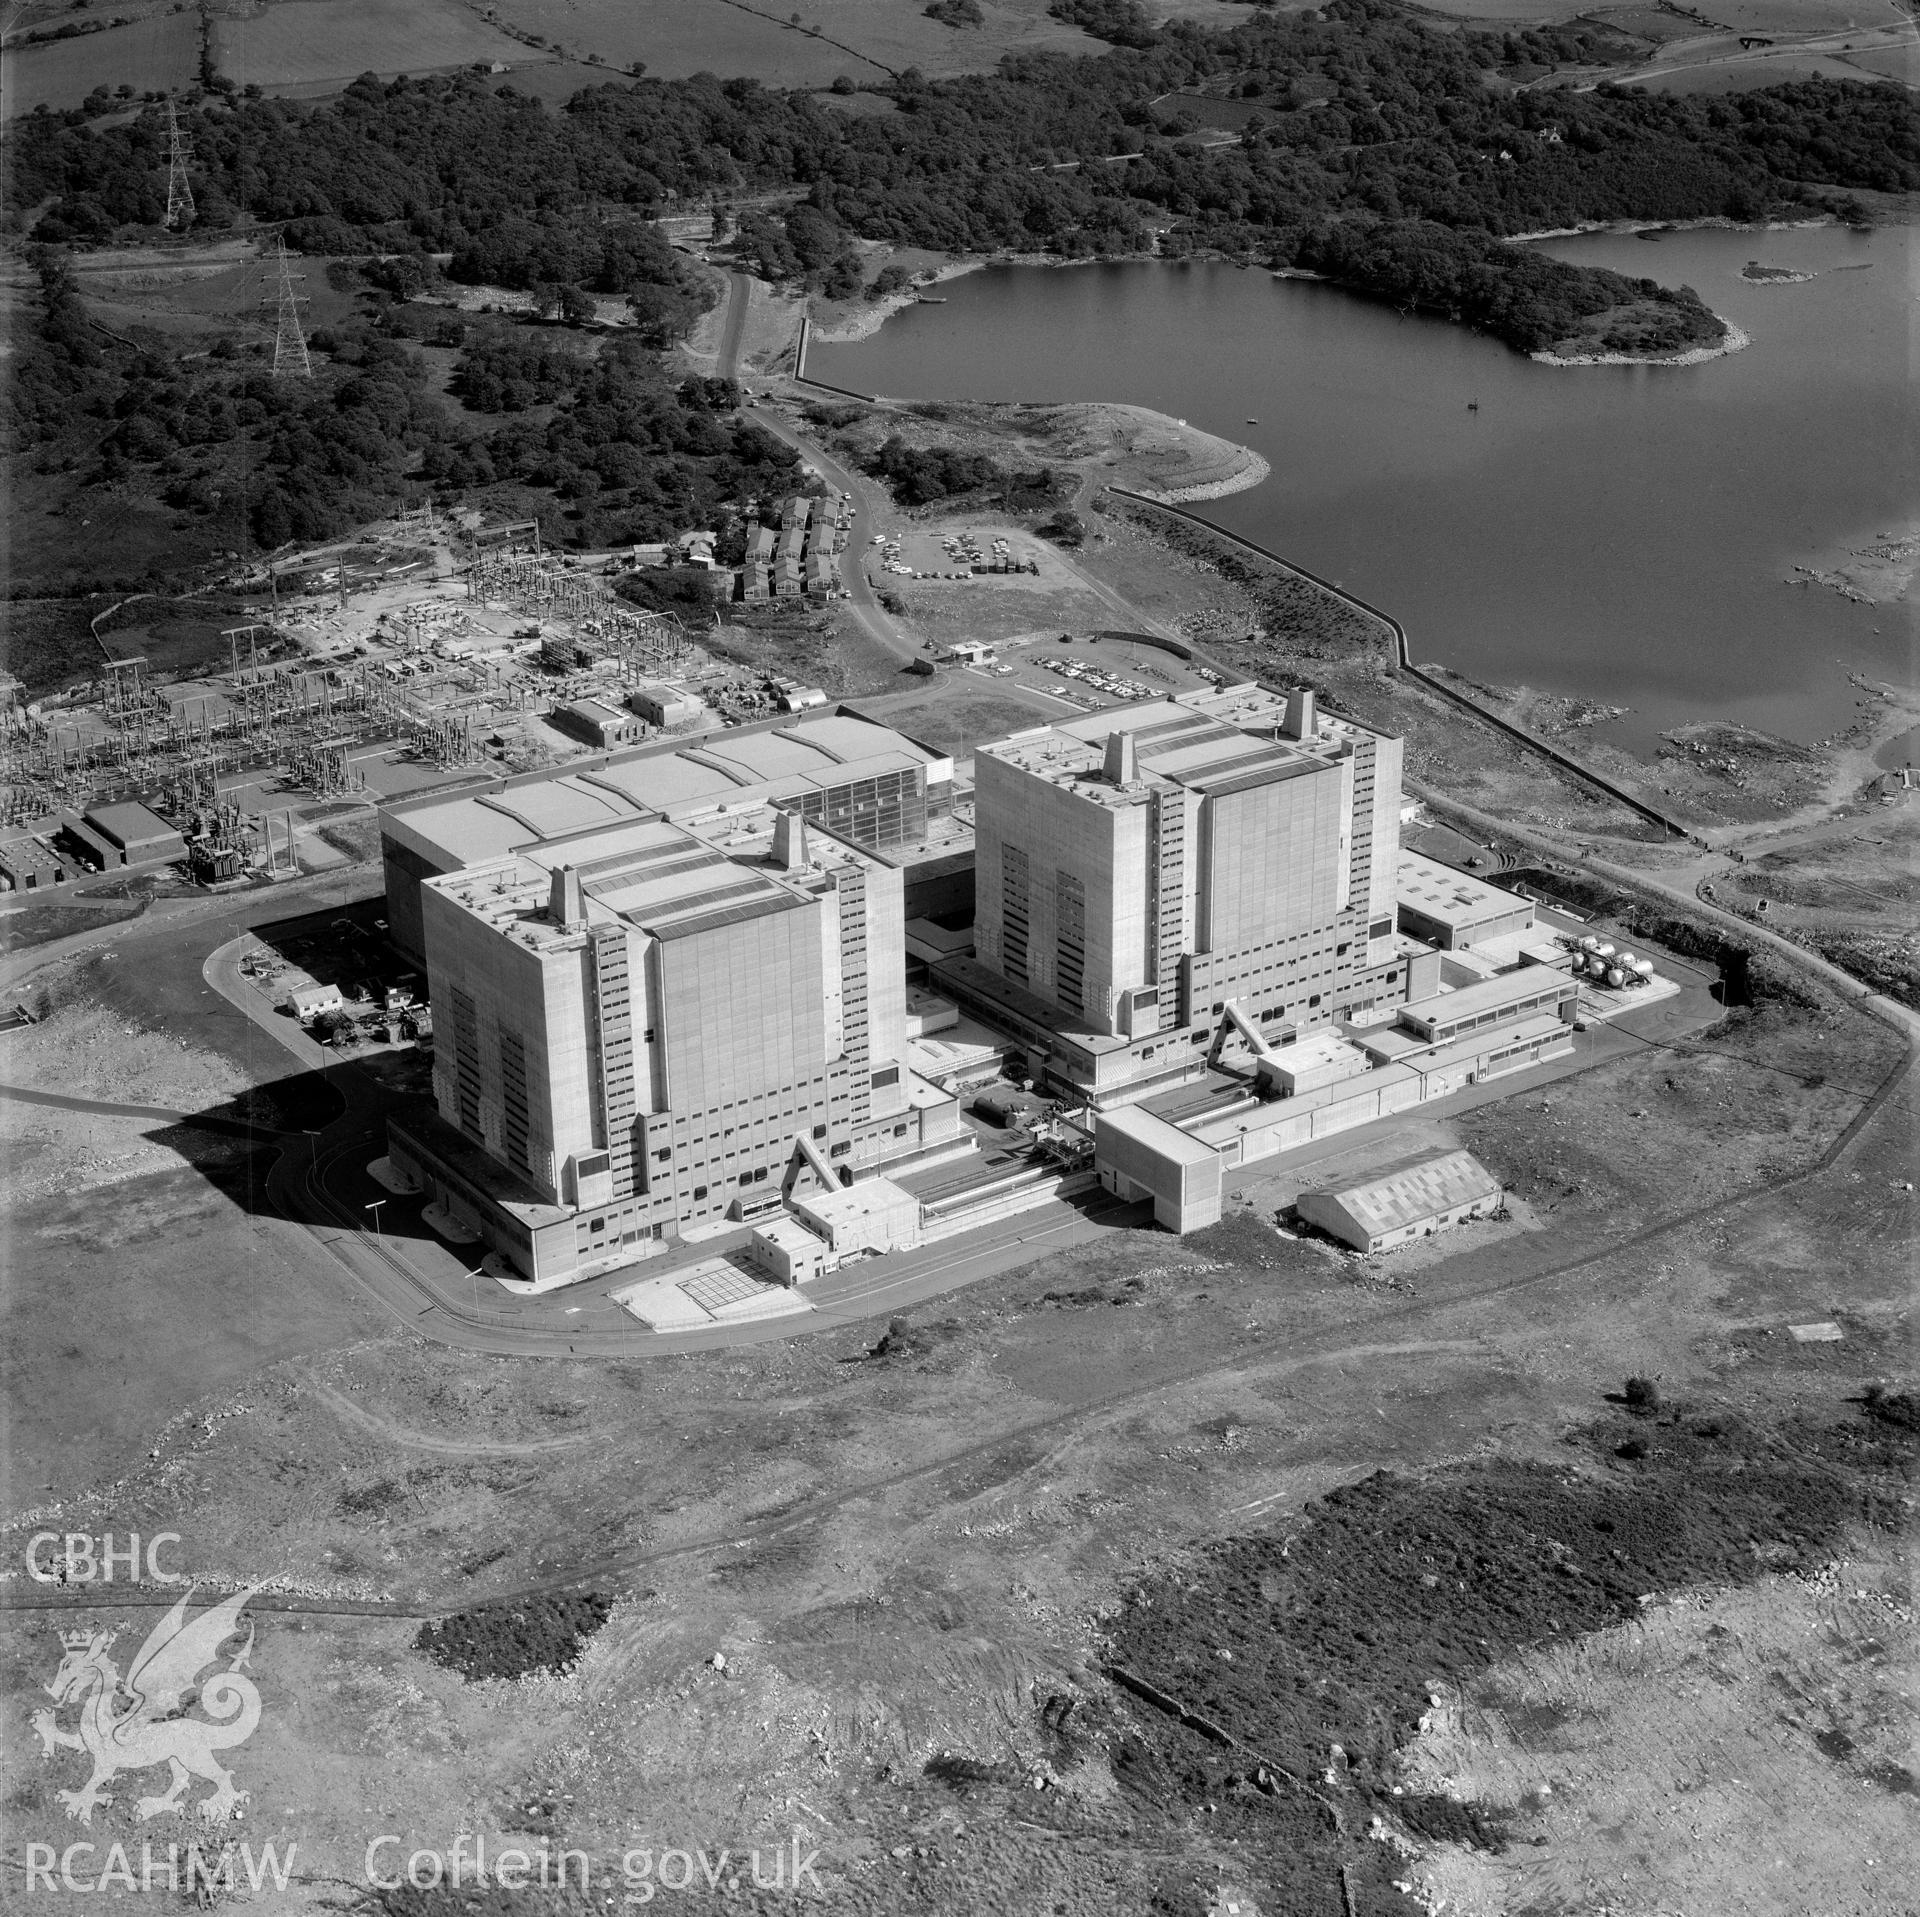 Black and white oblique aerial photograph showing Trawsfynydd Nuclear Power Station. From Aerofilms album Merionethshire and Montgomeryshire, taken by Aerofilms Ltd and dated 1966.